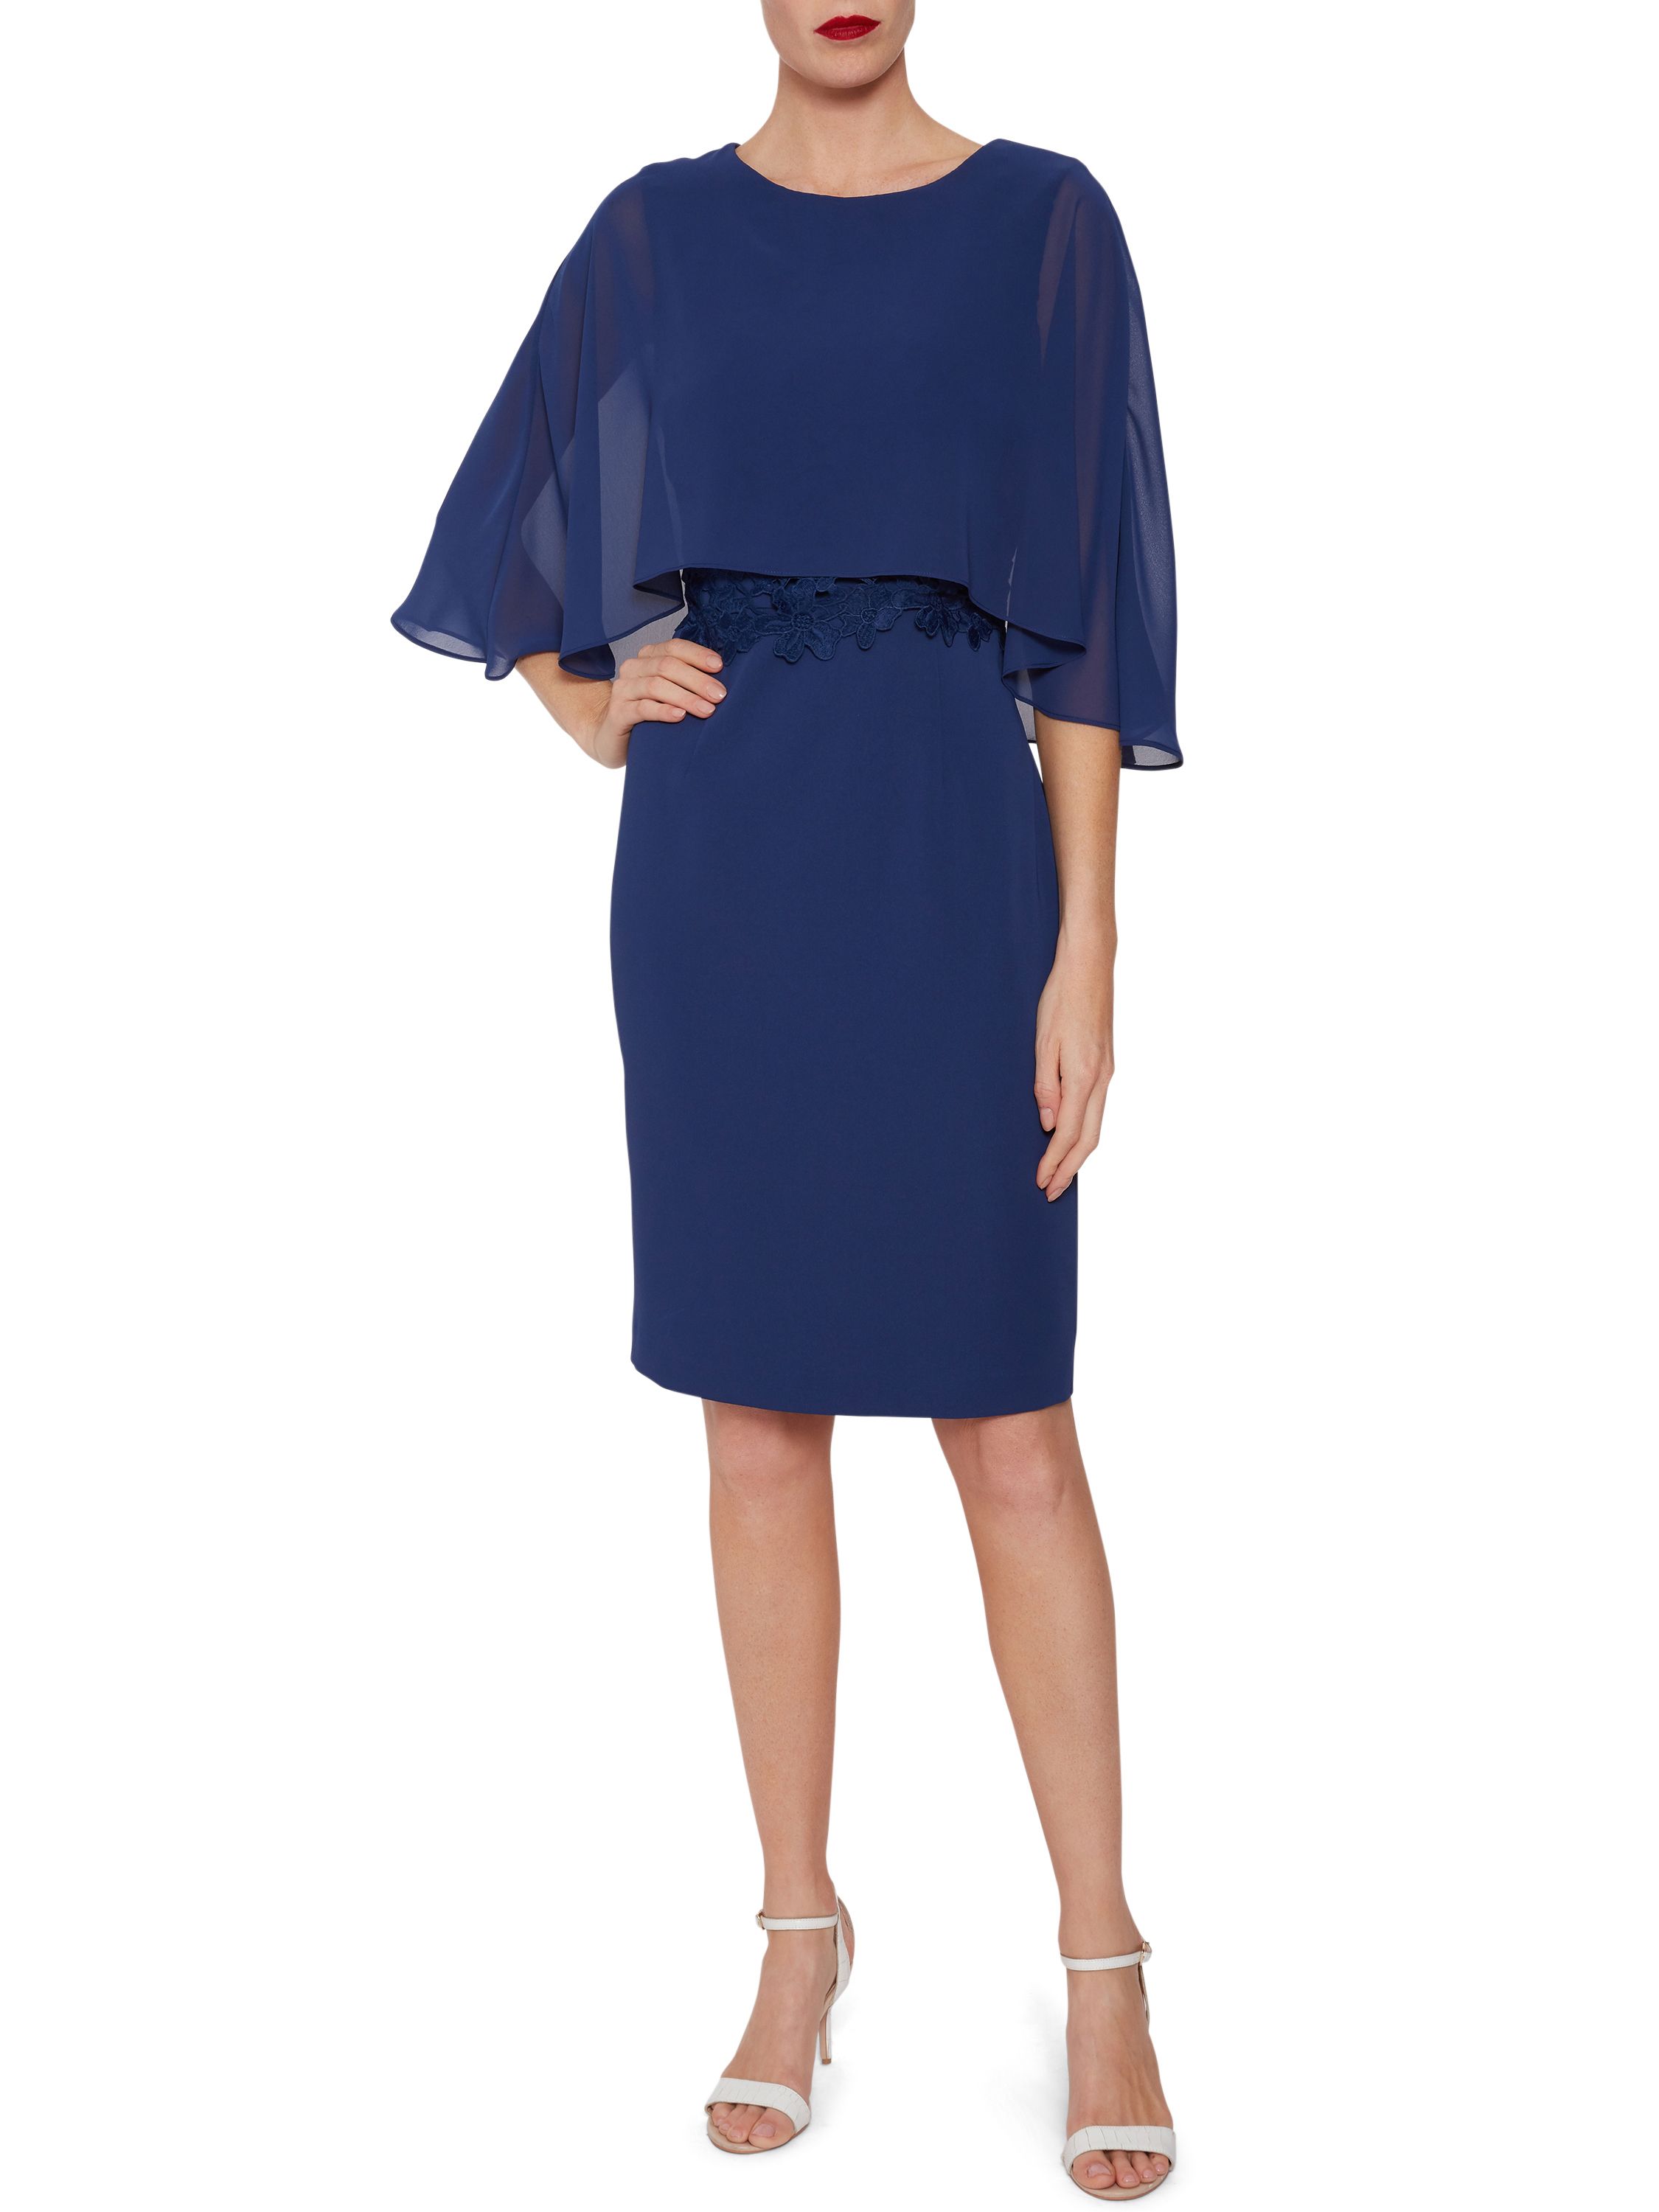 Make this stylish crepe dress and cape by Gina Bacconi one of your staple items this season. Fashioned from a gorgeous soft crepe fabric, the dress takes a simple shift shape to flatter the figure, accompanied by a cape attached at the neckline to cover the shoulders, featuring a guipure lace bodice underneath the cape for extra detailing. Fastened with a concealed side zip.